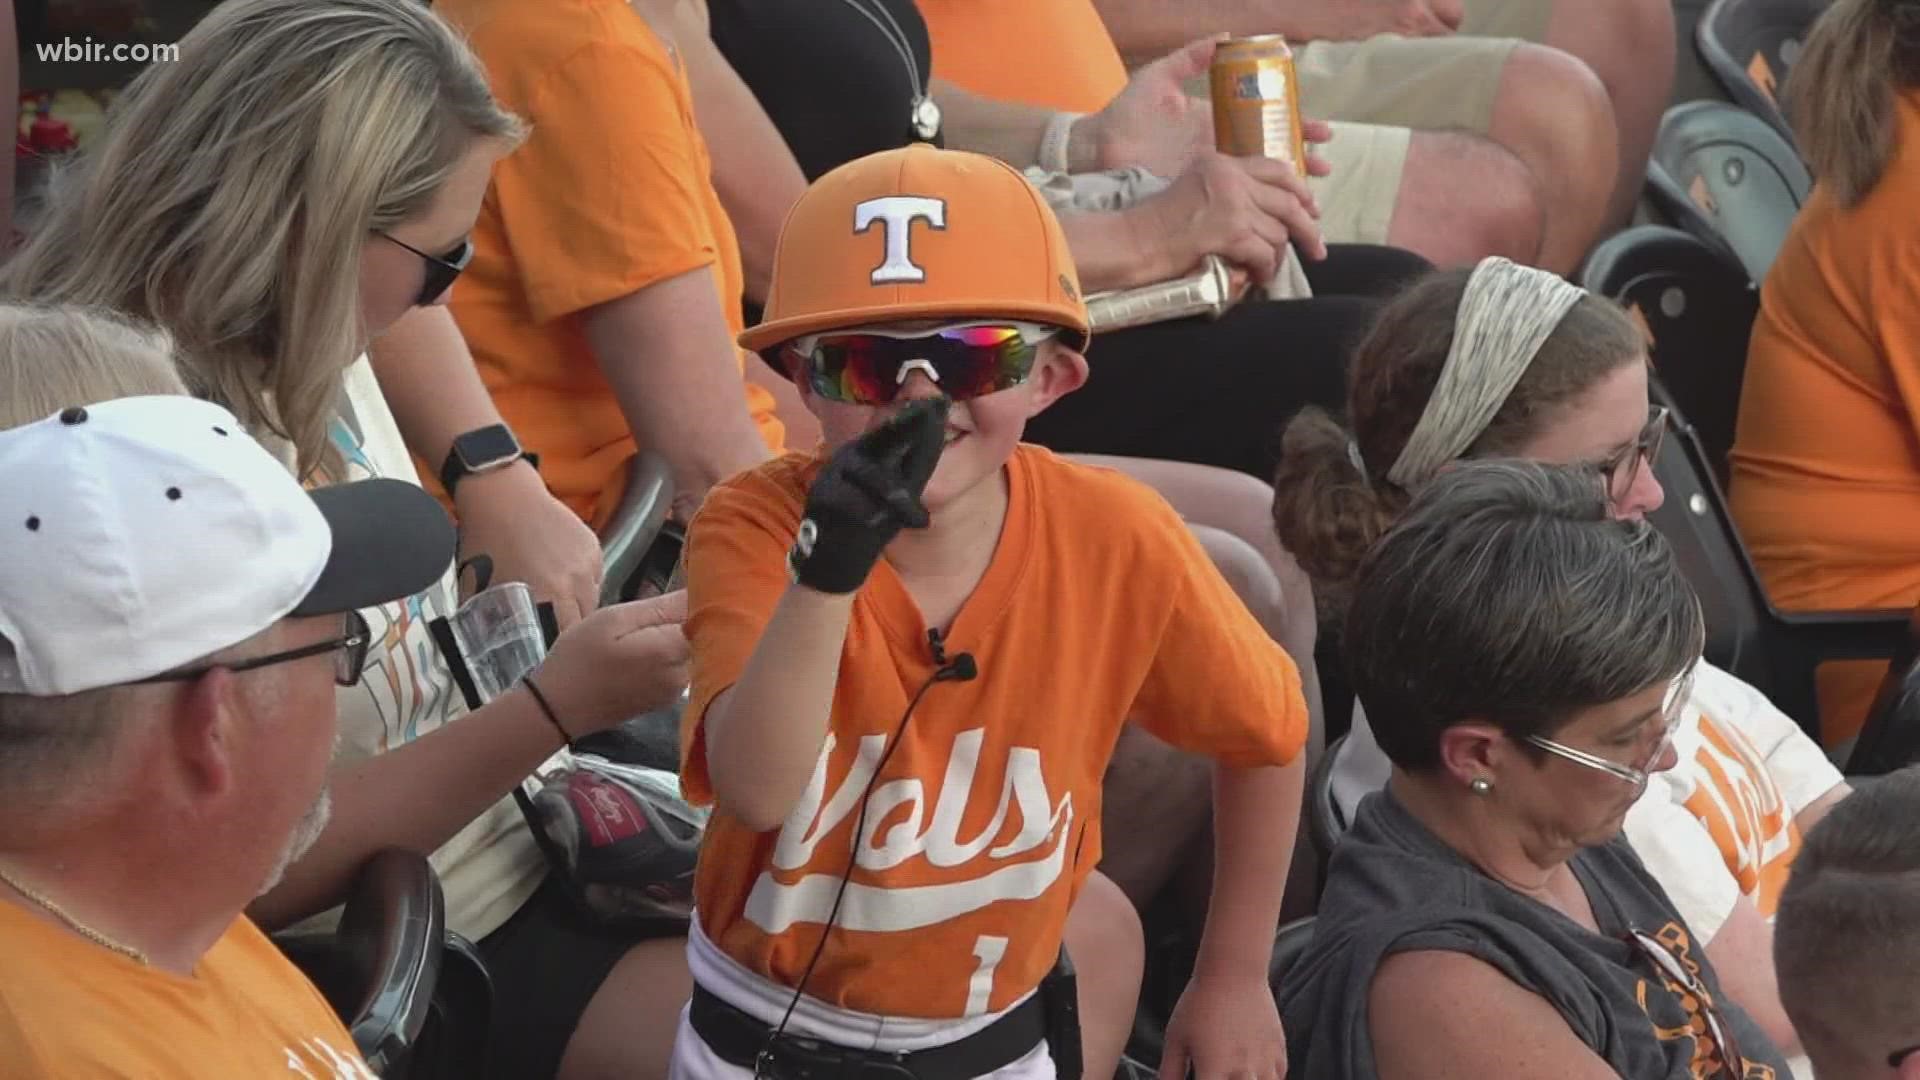 Pigeon Forge native Boone Barnhart dresses up as his favorite players at Vols games and practices his skill from the stands.